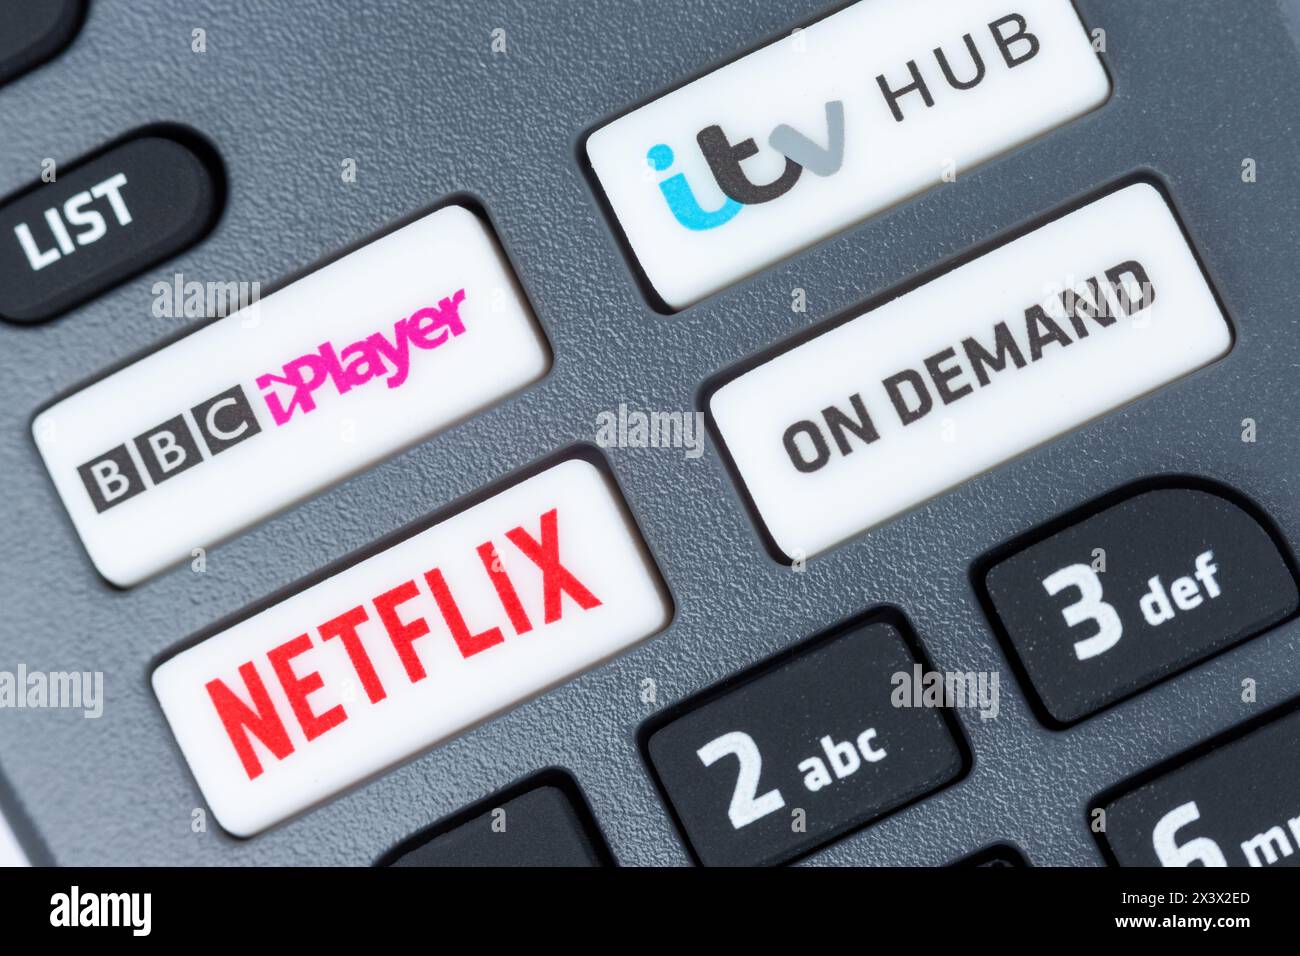 Close-Up Of a Freesat Remote Control which has buttons for Netflix, BBC iPlayer, itv Hub and On Demand Stock Photo